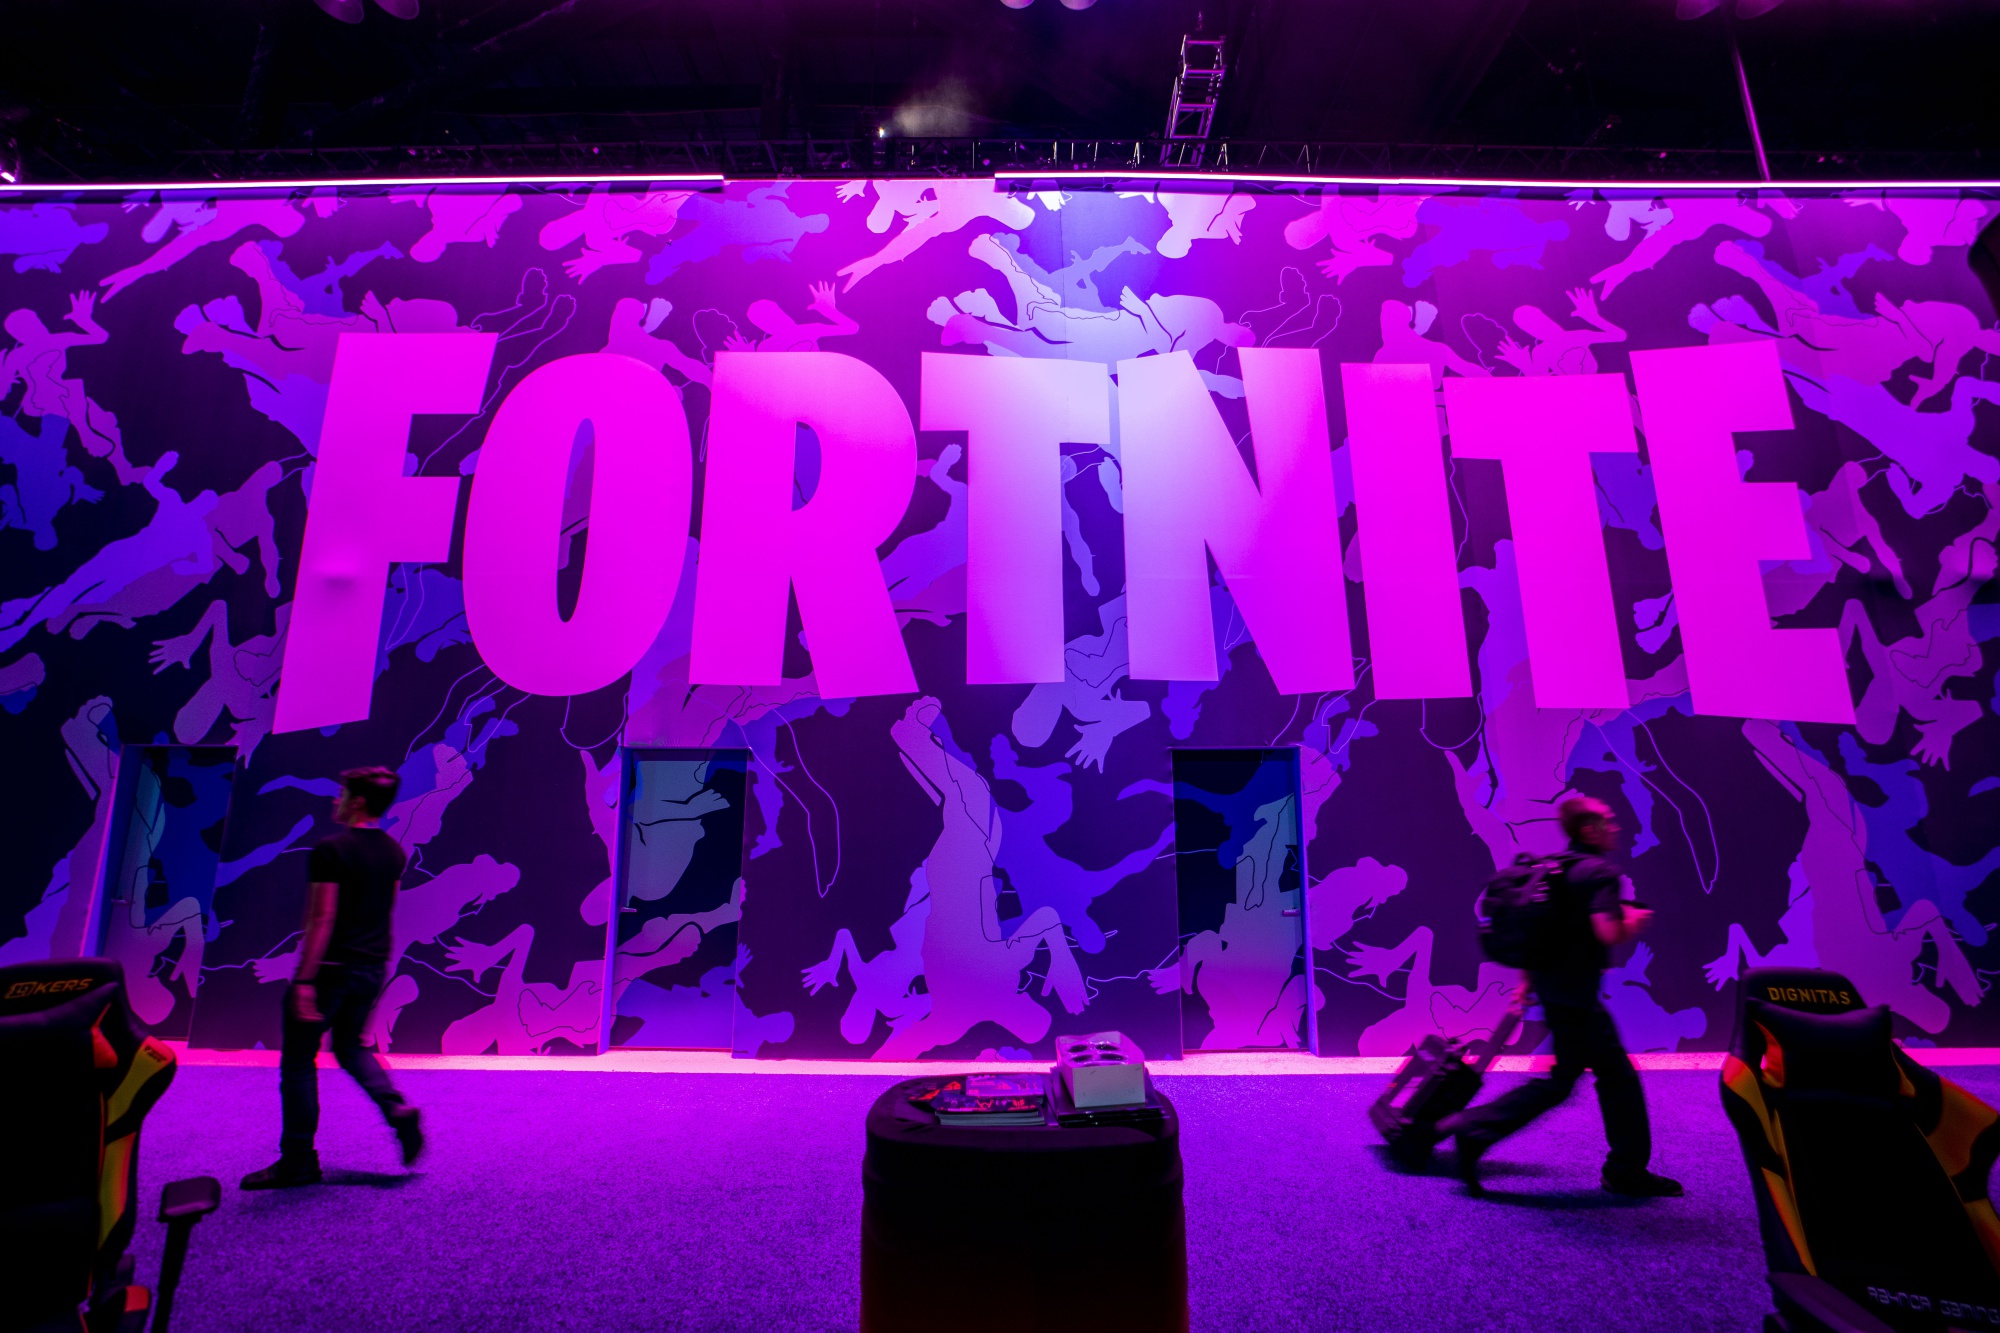 Google will lose $50 million or more in 2018 from Fortnite